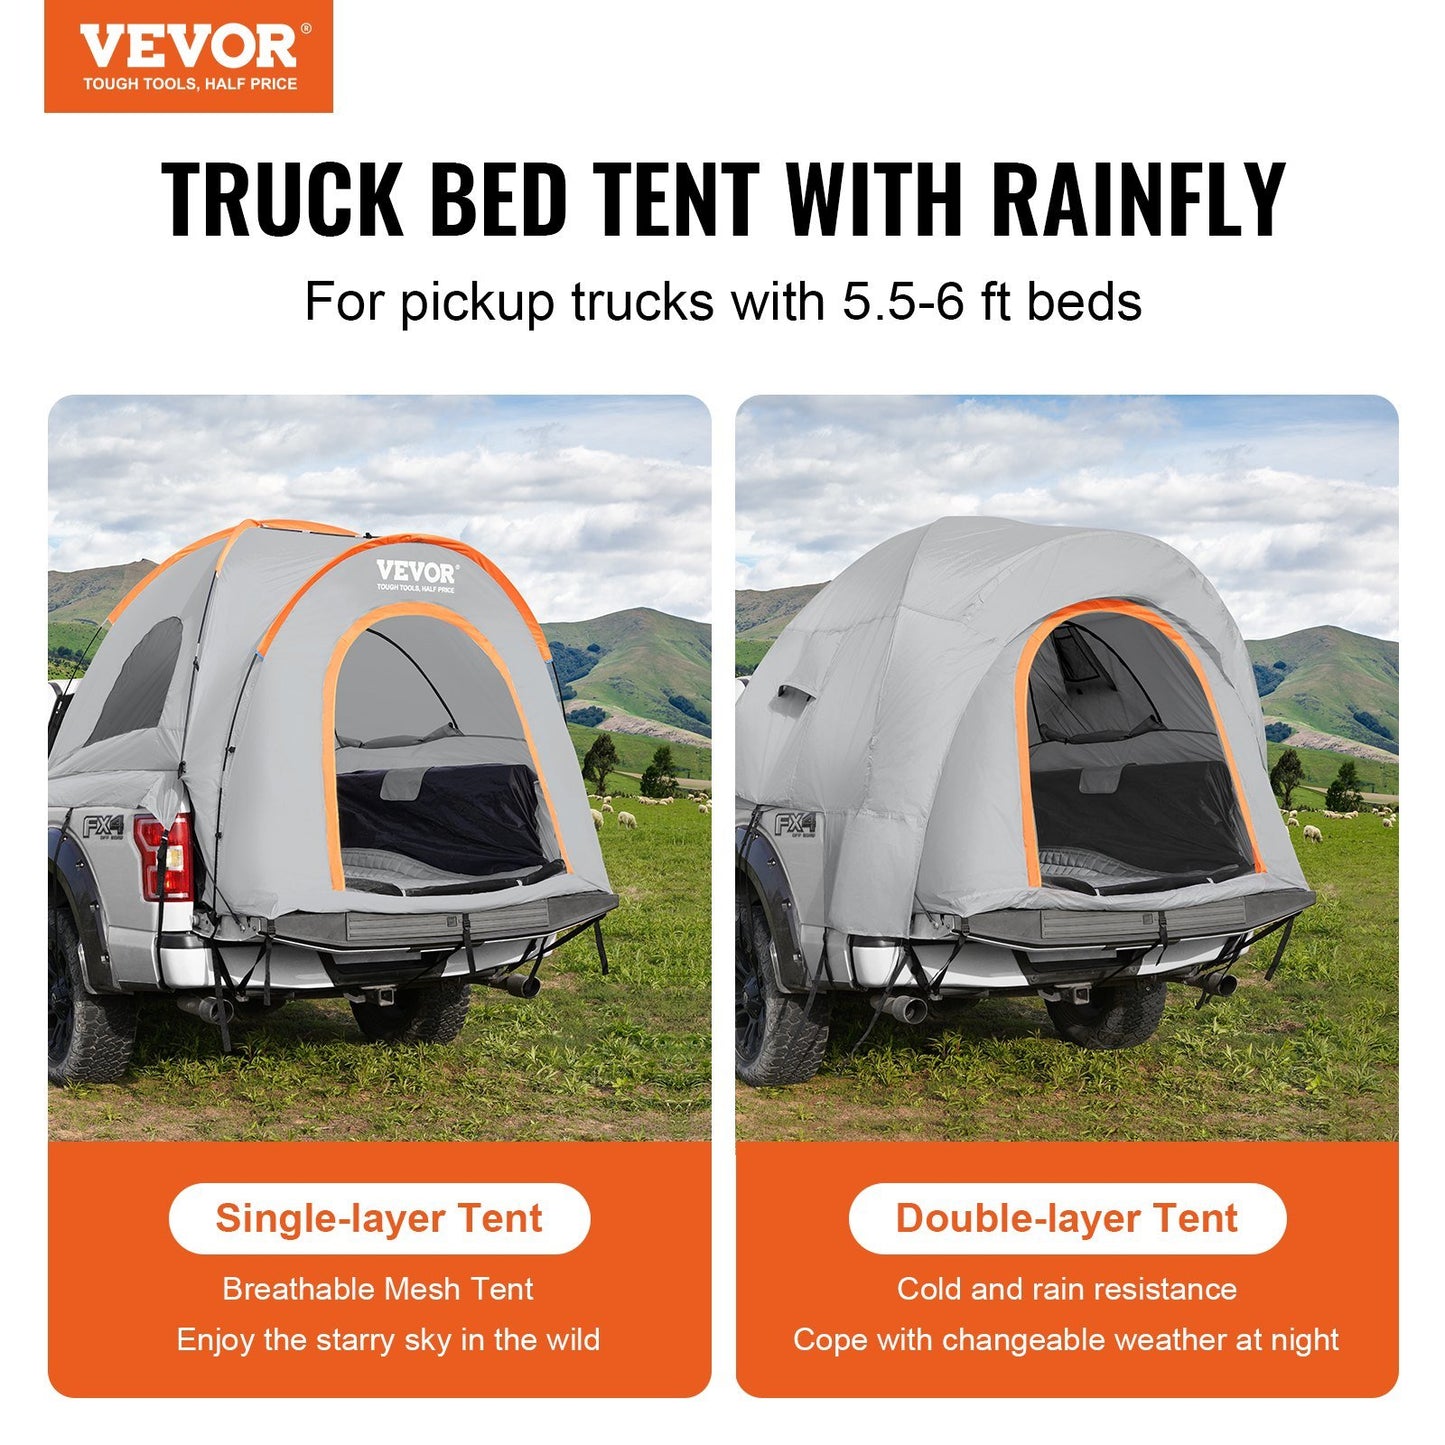 VEVOR Truck Bed Tent, 5.5'-6' Pickup Truck Tent with Rain Layer and Carry Bag, Waterproof PU2000mm Double Layer